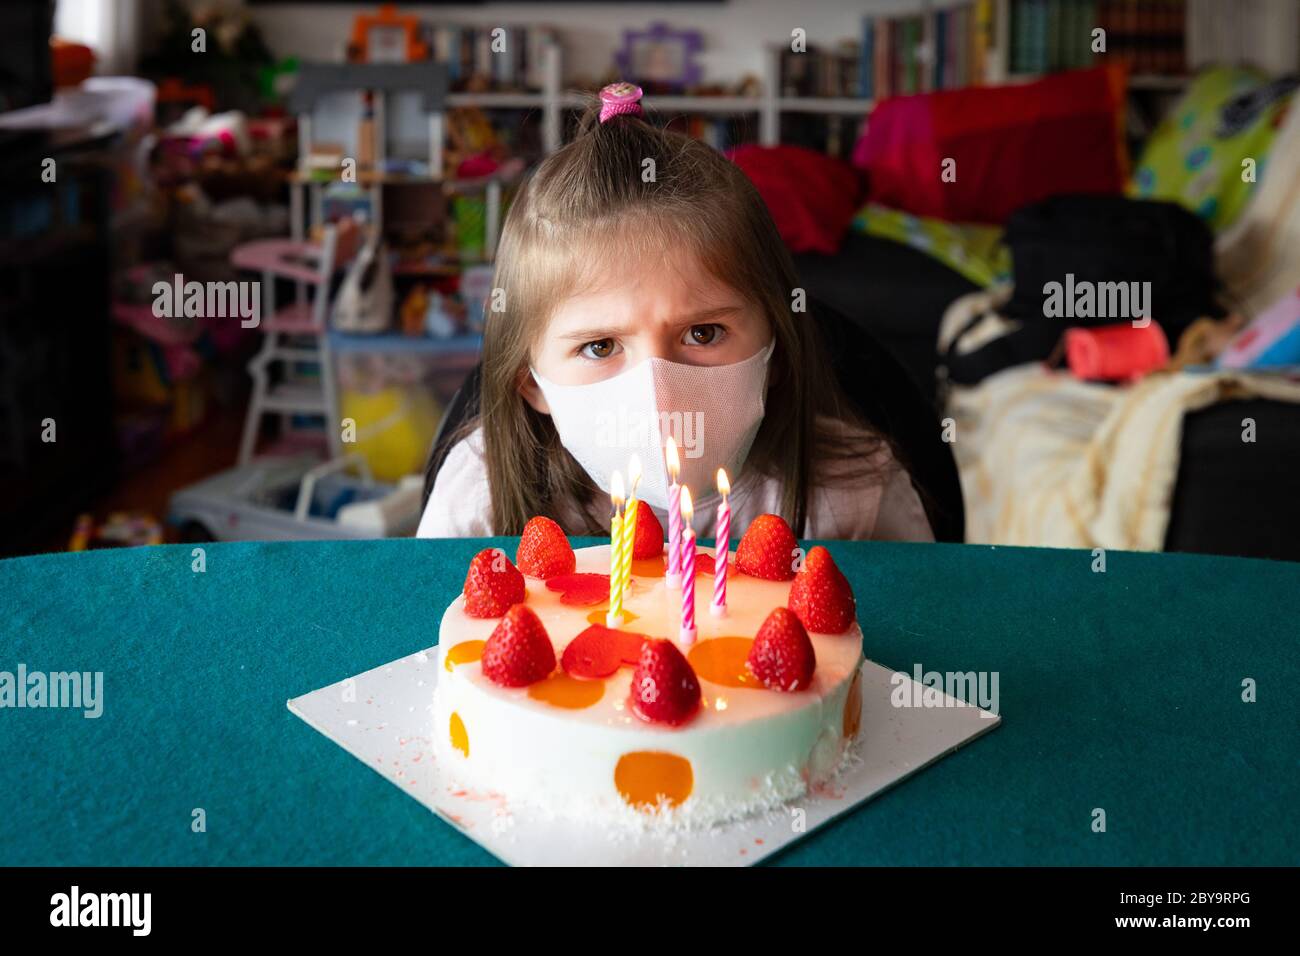 Young girl wearing a face mask during the Covid-19 or coronavirus pandemic on her birthday sitting at a table frowning as she tries to work out how to Stock Photo